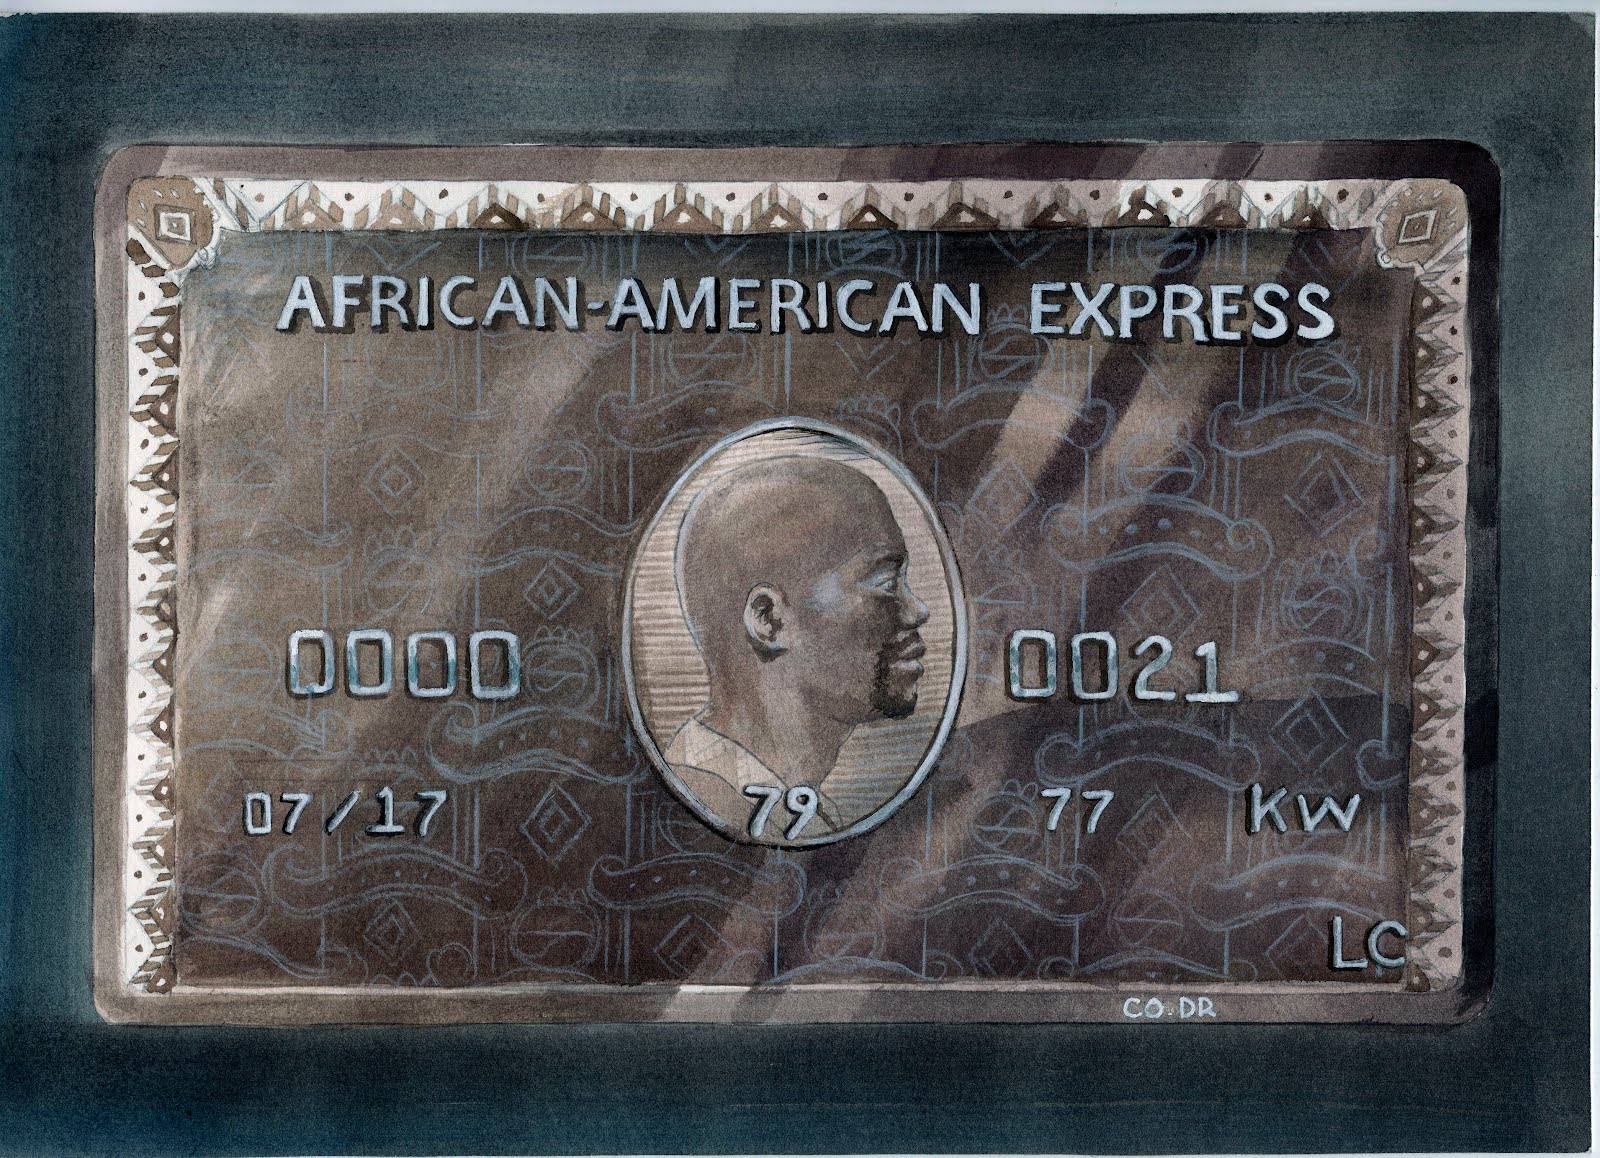 -10 000-: African-American Express